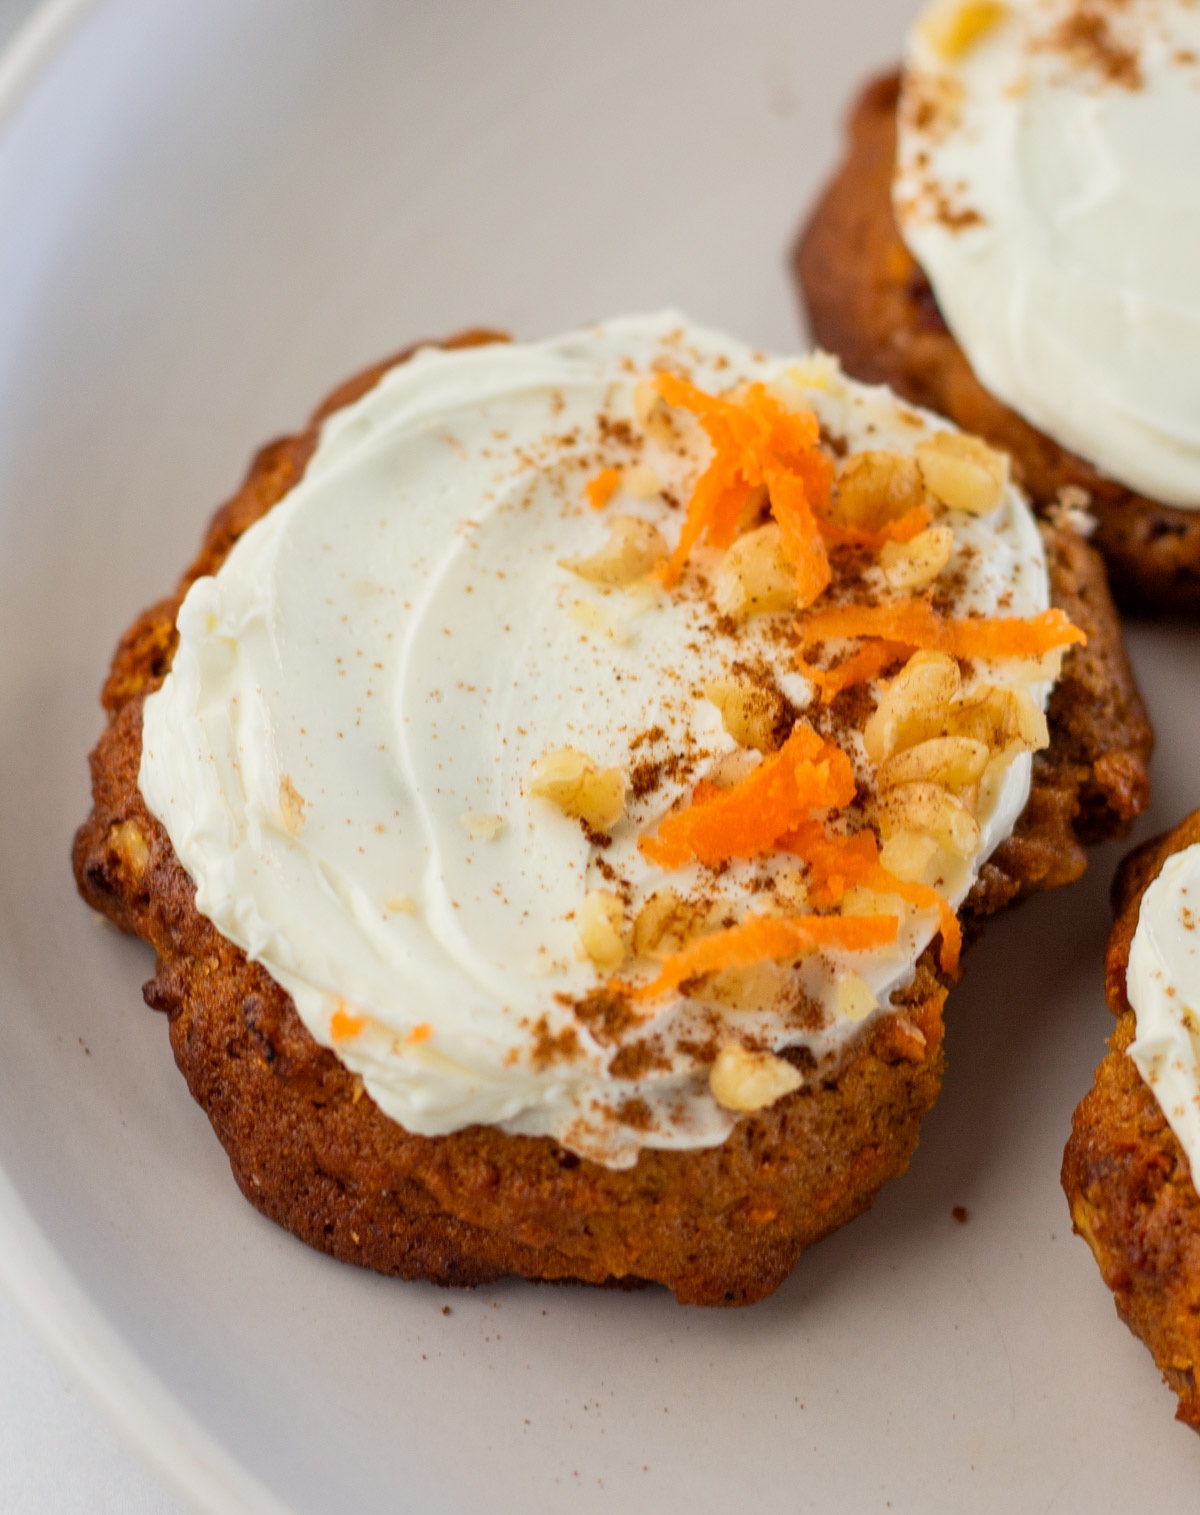 Cookies topped with carrots and nuts